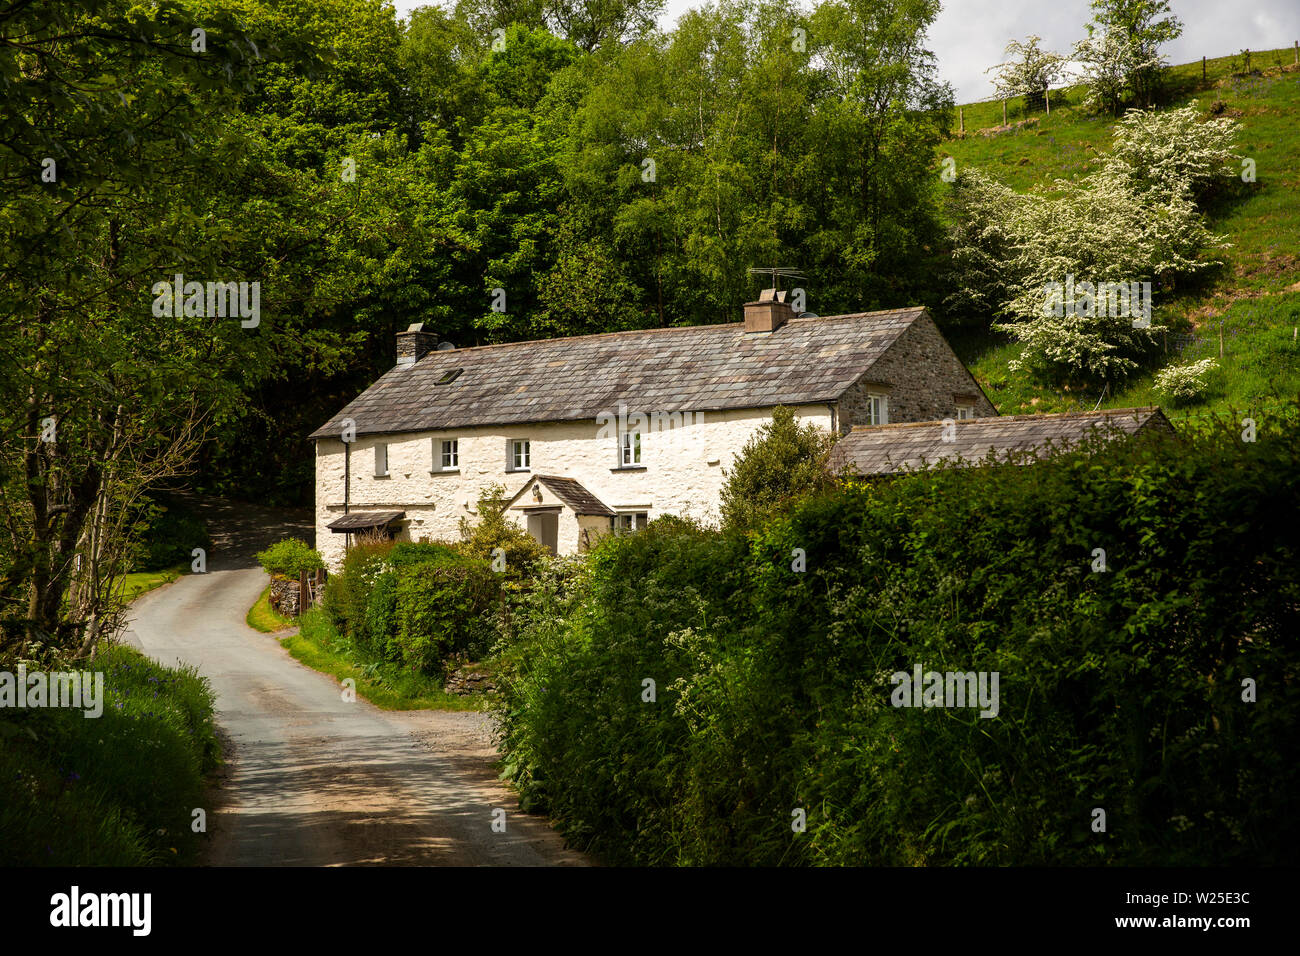 UK, Cumbria, Sedbergh, Lowgill, Crook of Lune, Pool House, isolated house by River Lune crossing Stock Photo